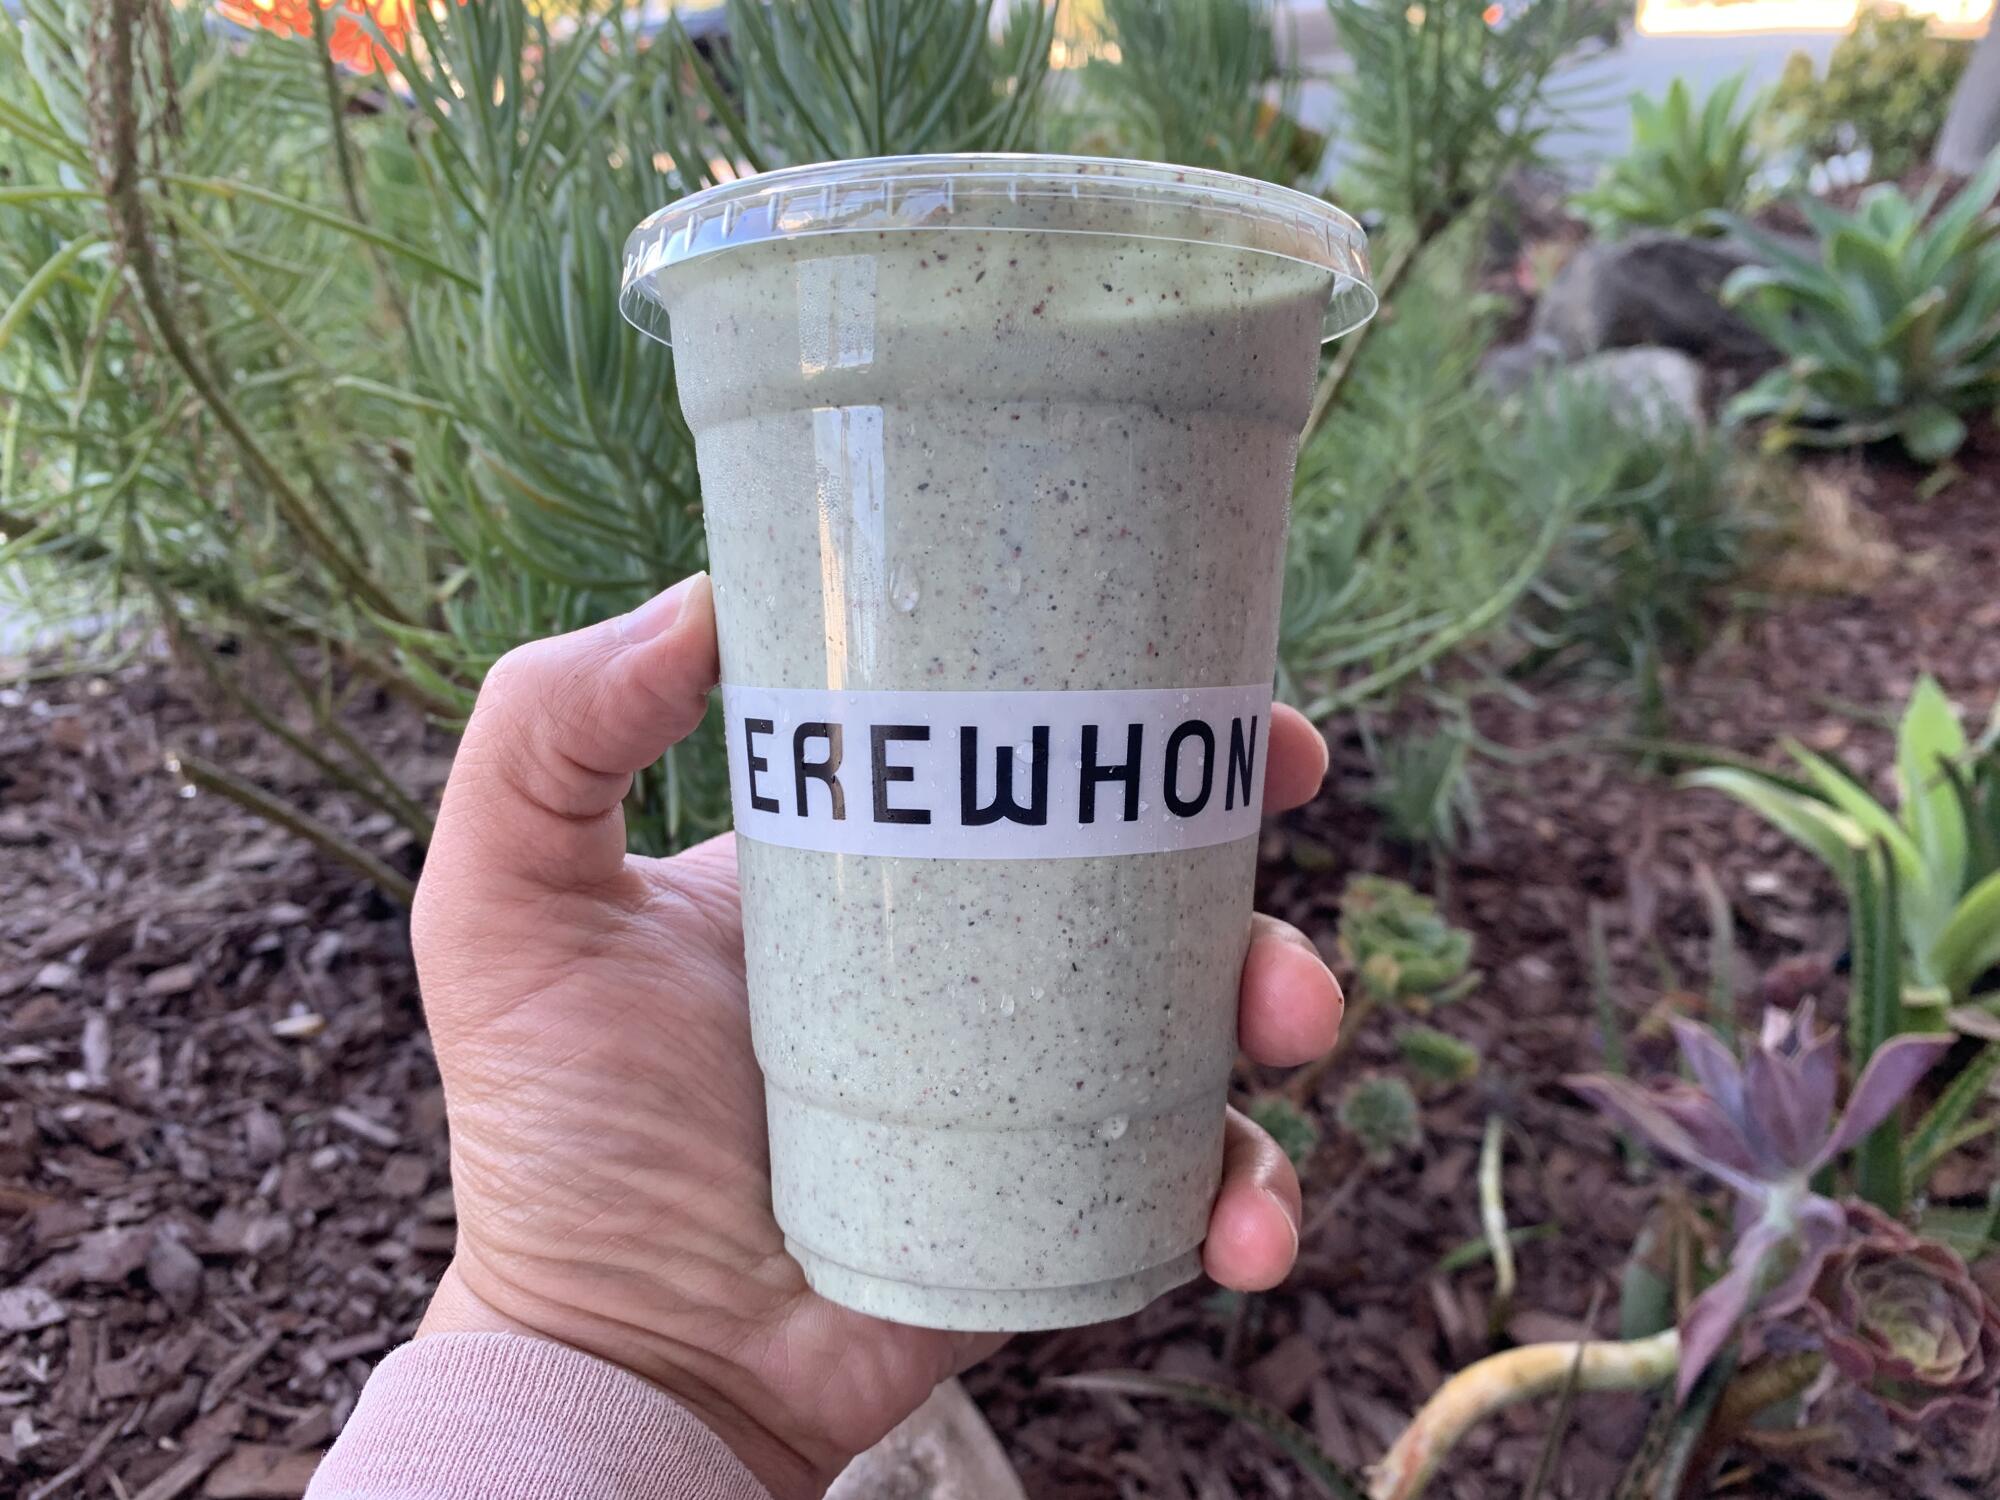 A hand holds a grayish smoothie with black specks in a plastic cup that says Erewhon.